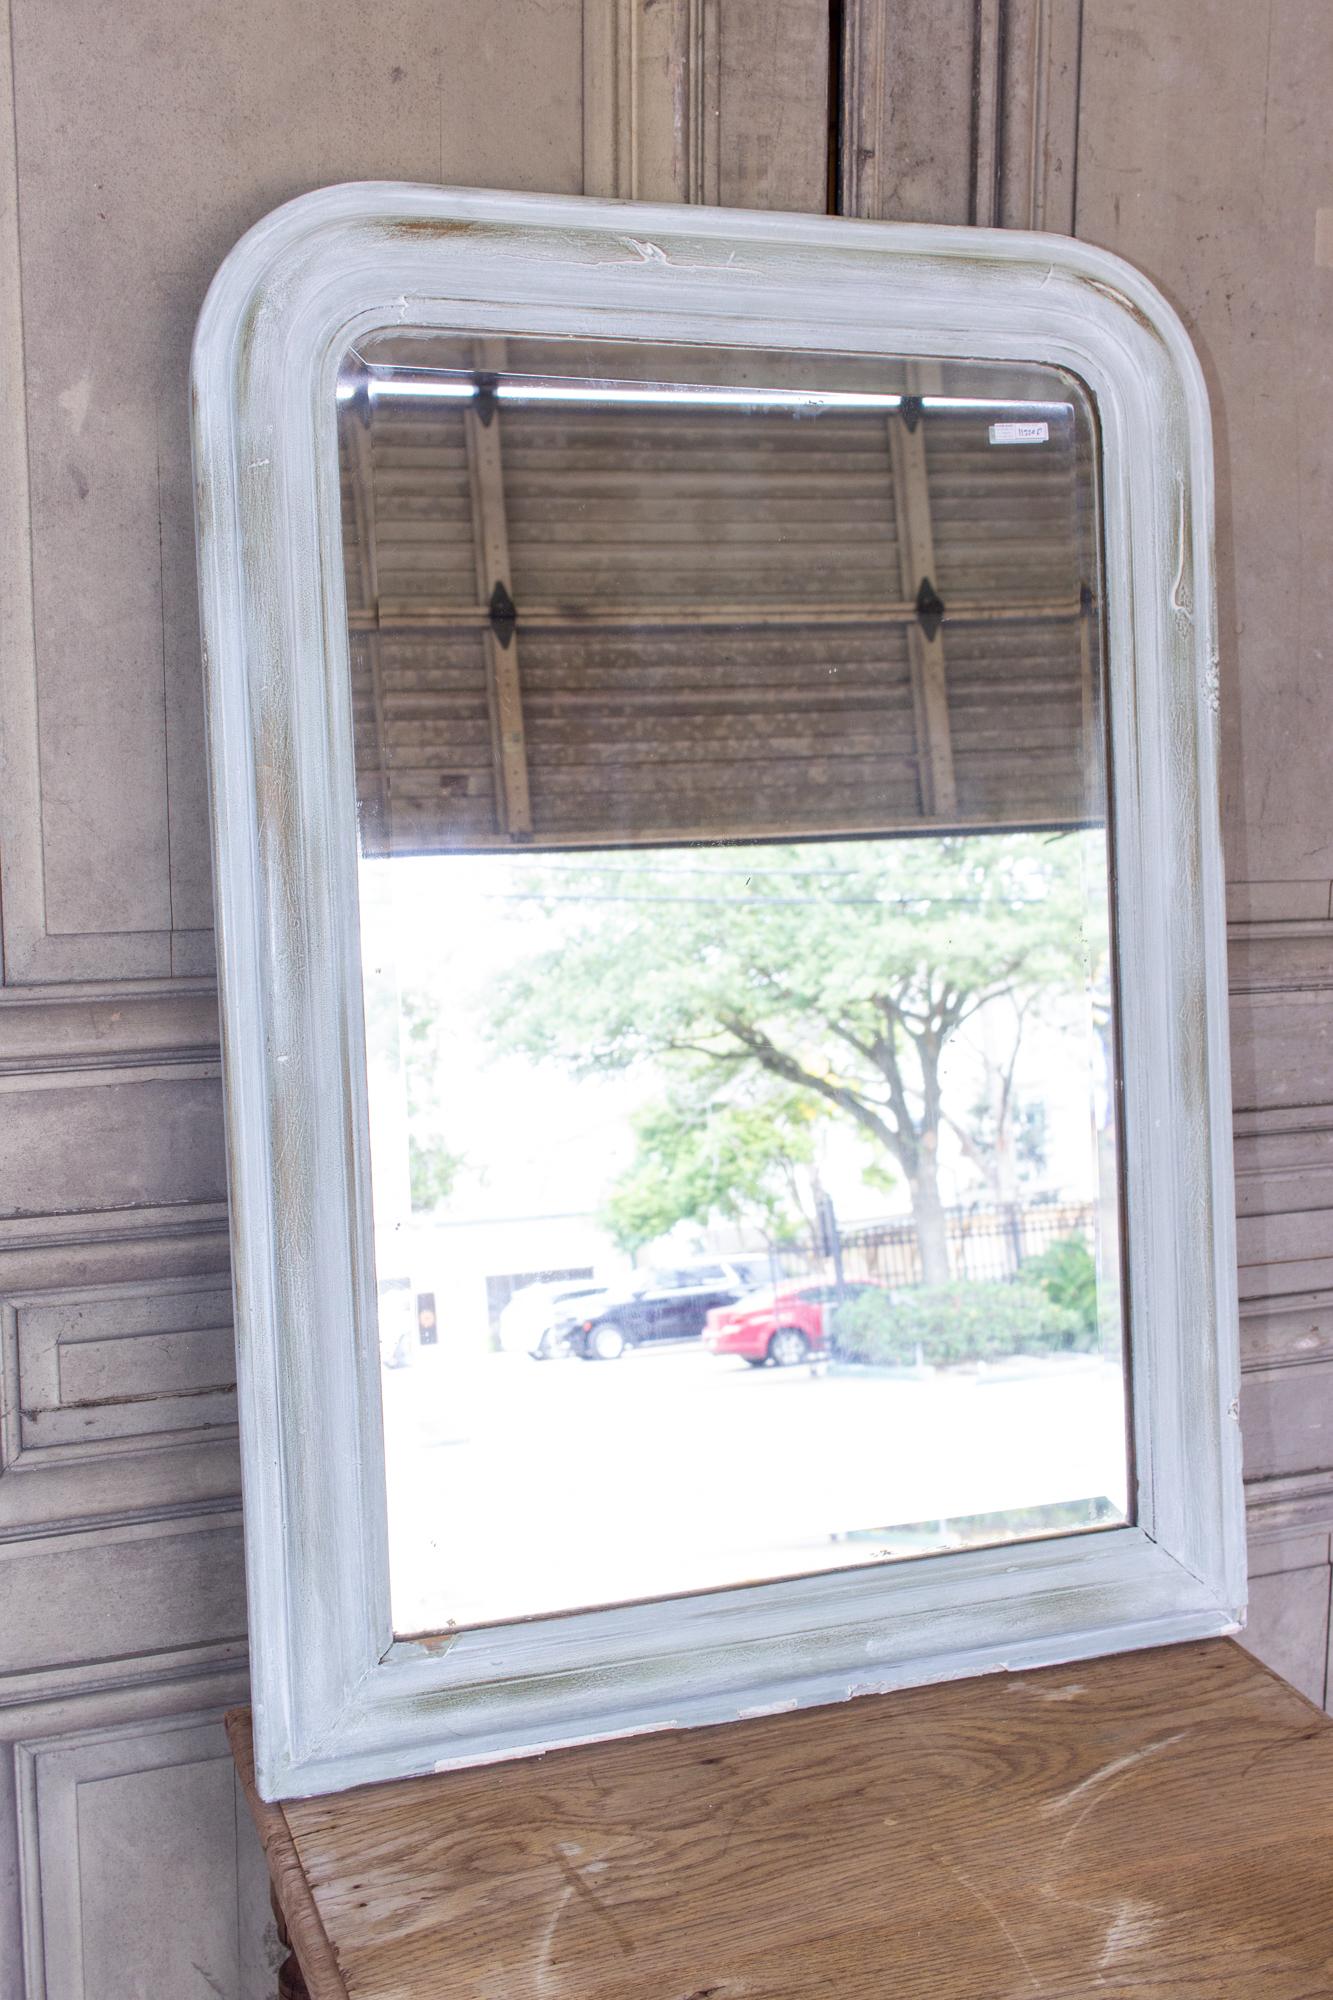 This antique French Louis Philippe mirror has been painted in a light gray color with green and gold accents. The frame is fairly simple, with the Classic lines of a Louis Philippe. The glass is beveled and in good condition, although there is some